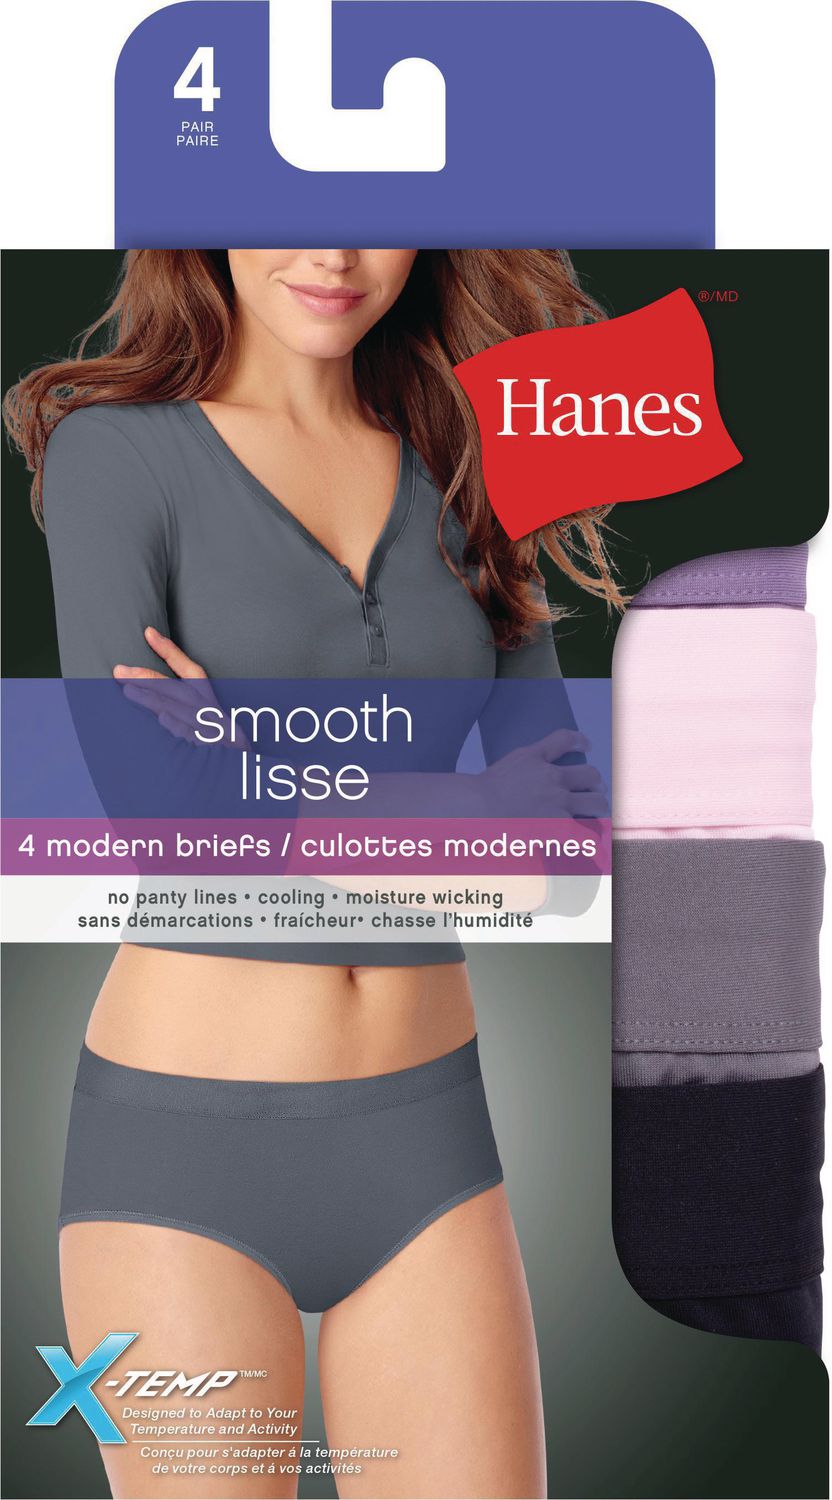 Hanes Women's 4 Pack Smooth Microfiber Brief, Sizes: S-2XL 